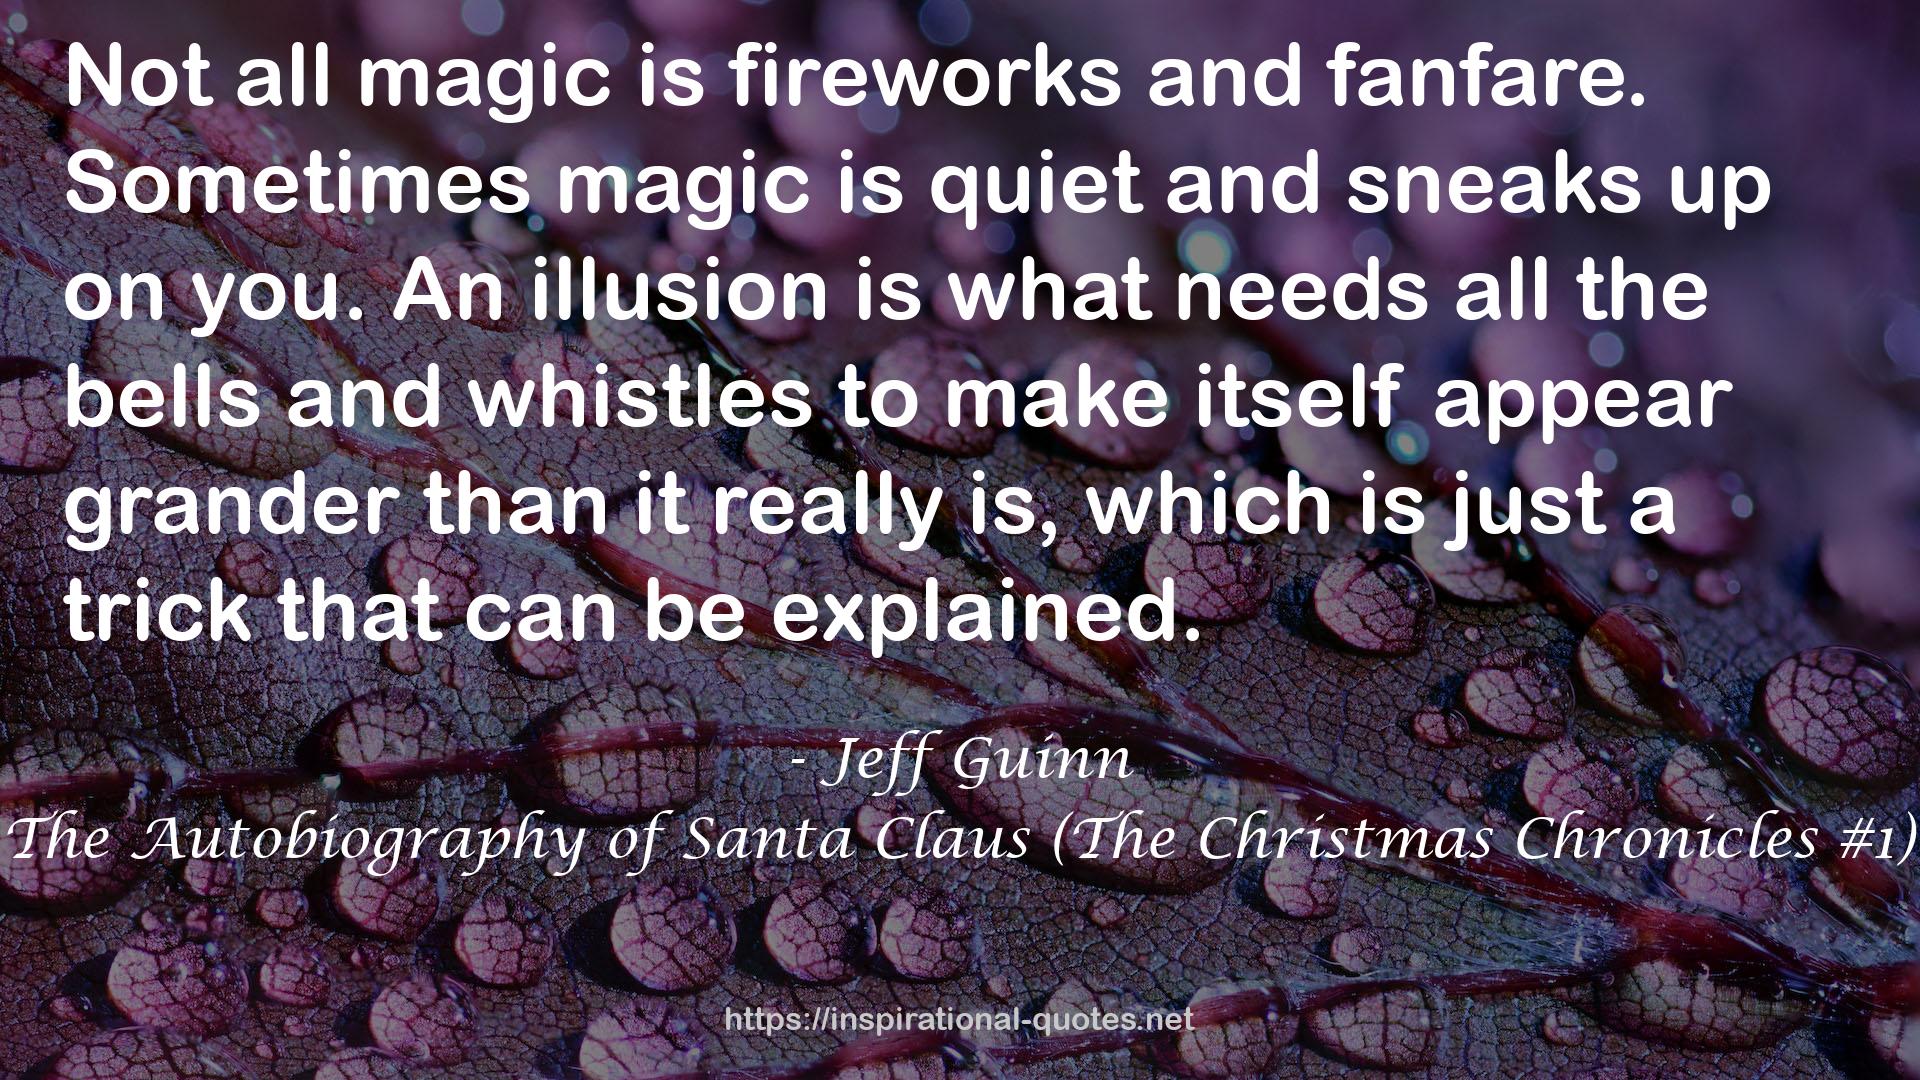 The Autobiography of Santa Claus (The Christmas Chronicles #1) QUOTES